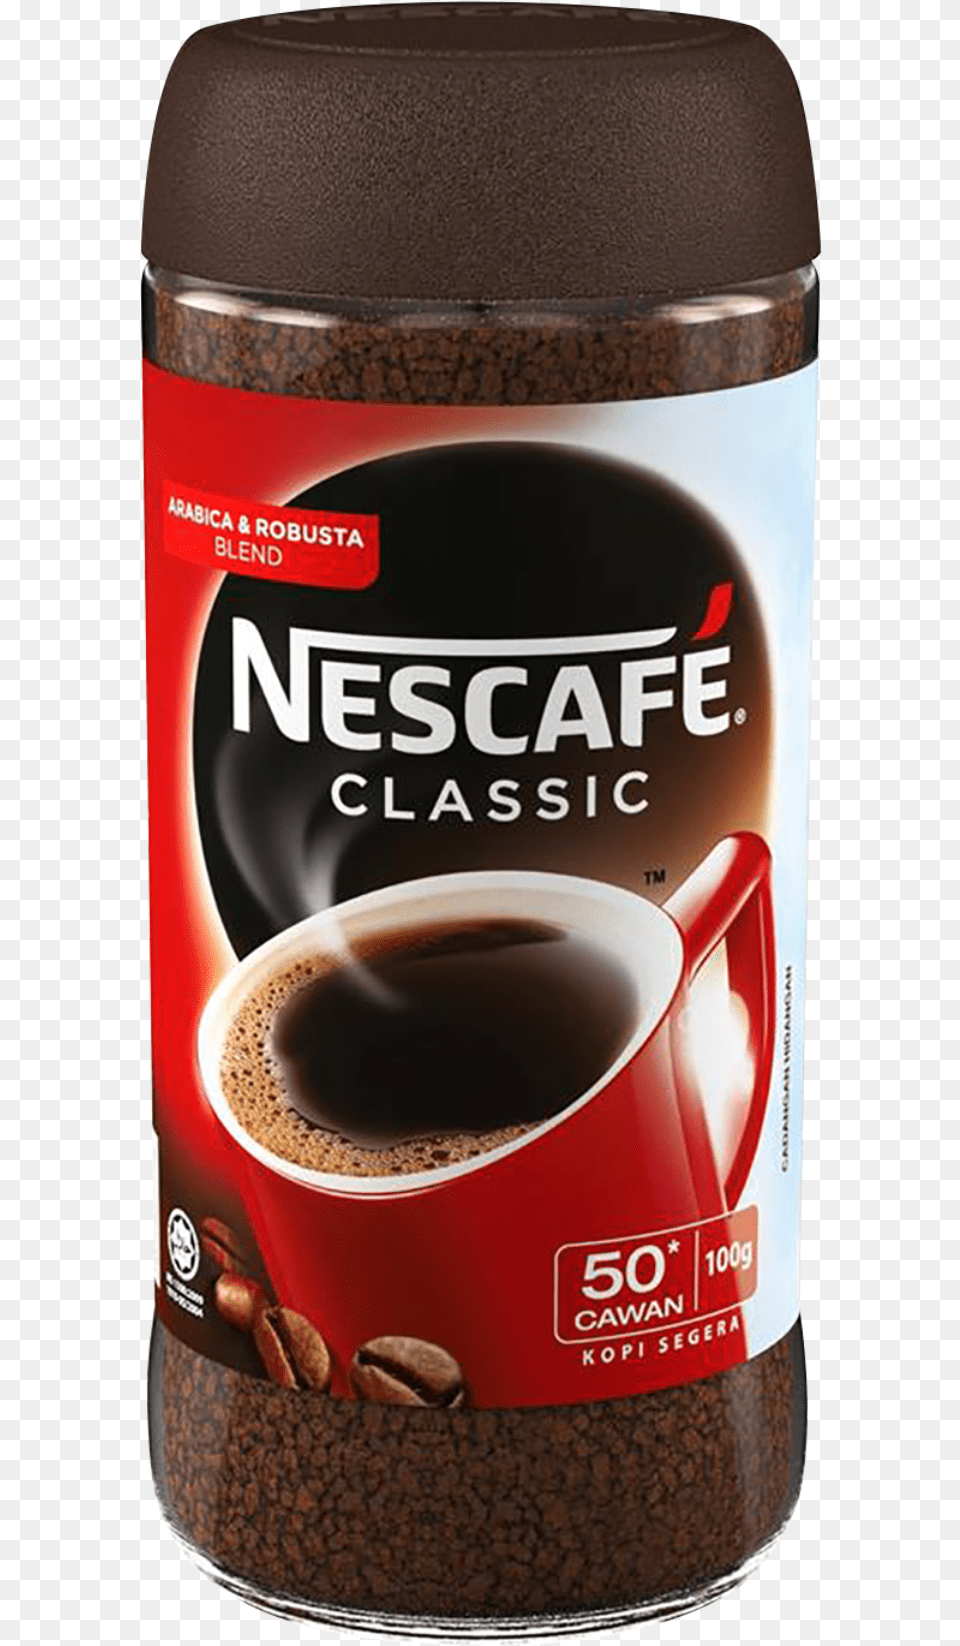 Nescafe Classic 100g Nescafe Coffee Jar, Cup, Beverage, Coffee Cup, Chocolate Png